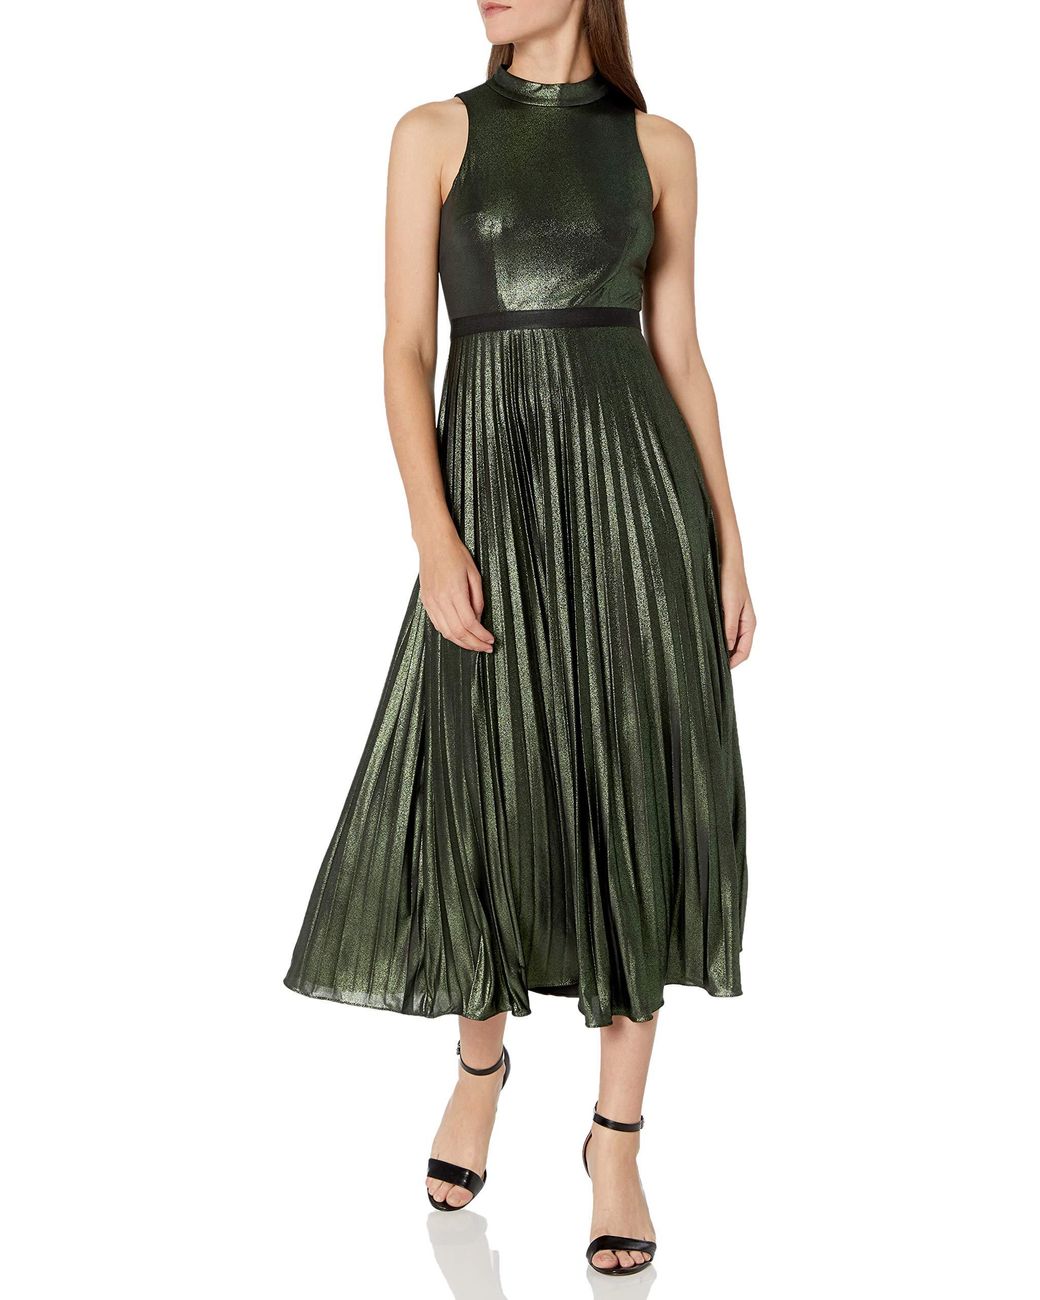 Donna Morgan Stretch Foil Pleated Skirt Halter Dress in Green 